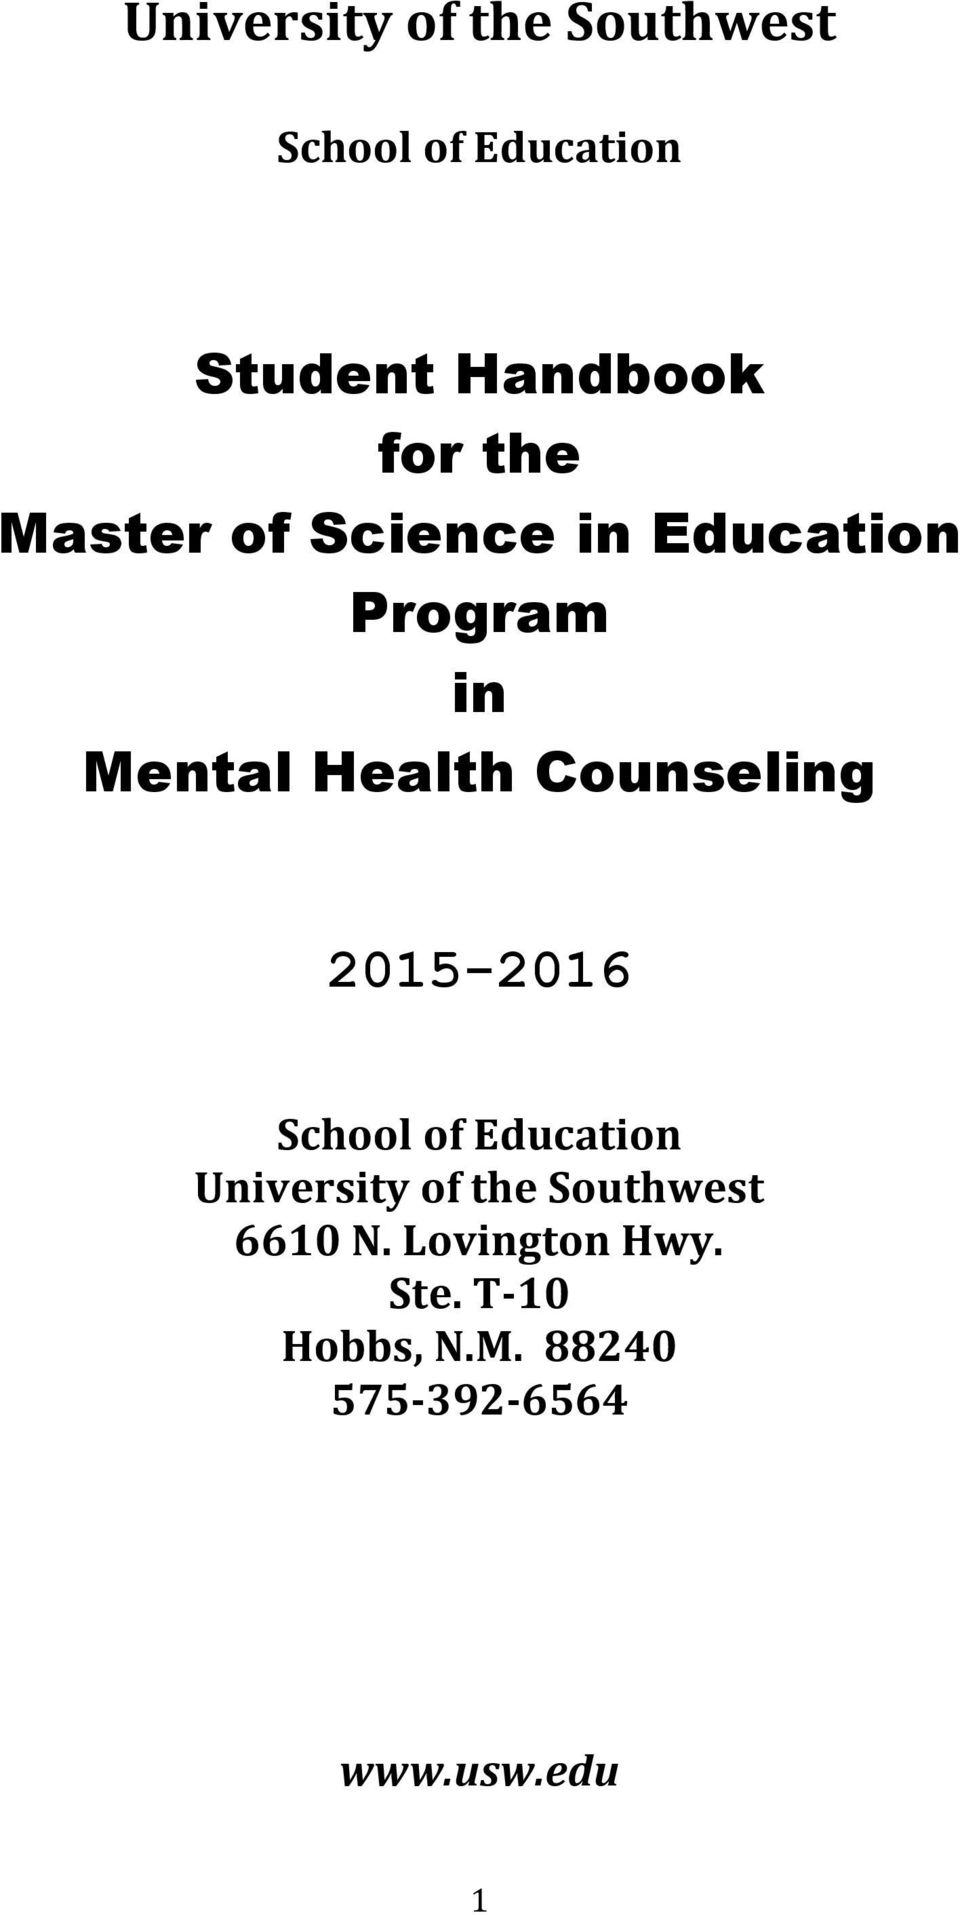 Counseling 2015-2016 School of Education University of the Southwest